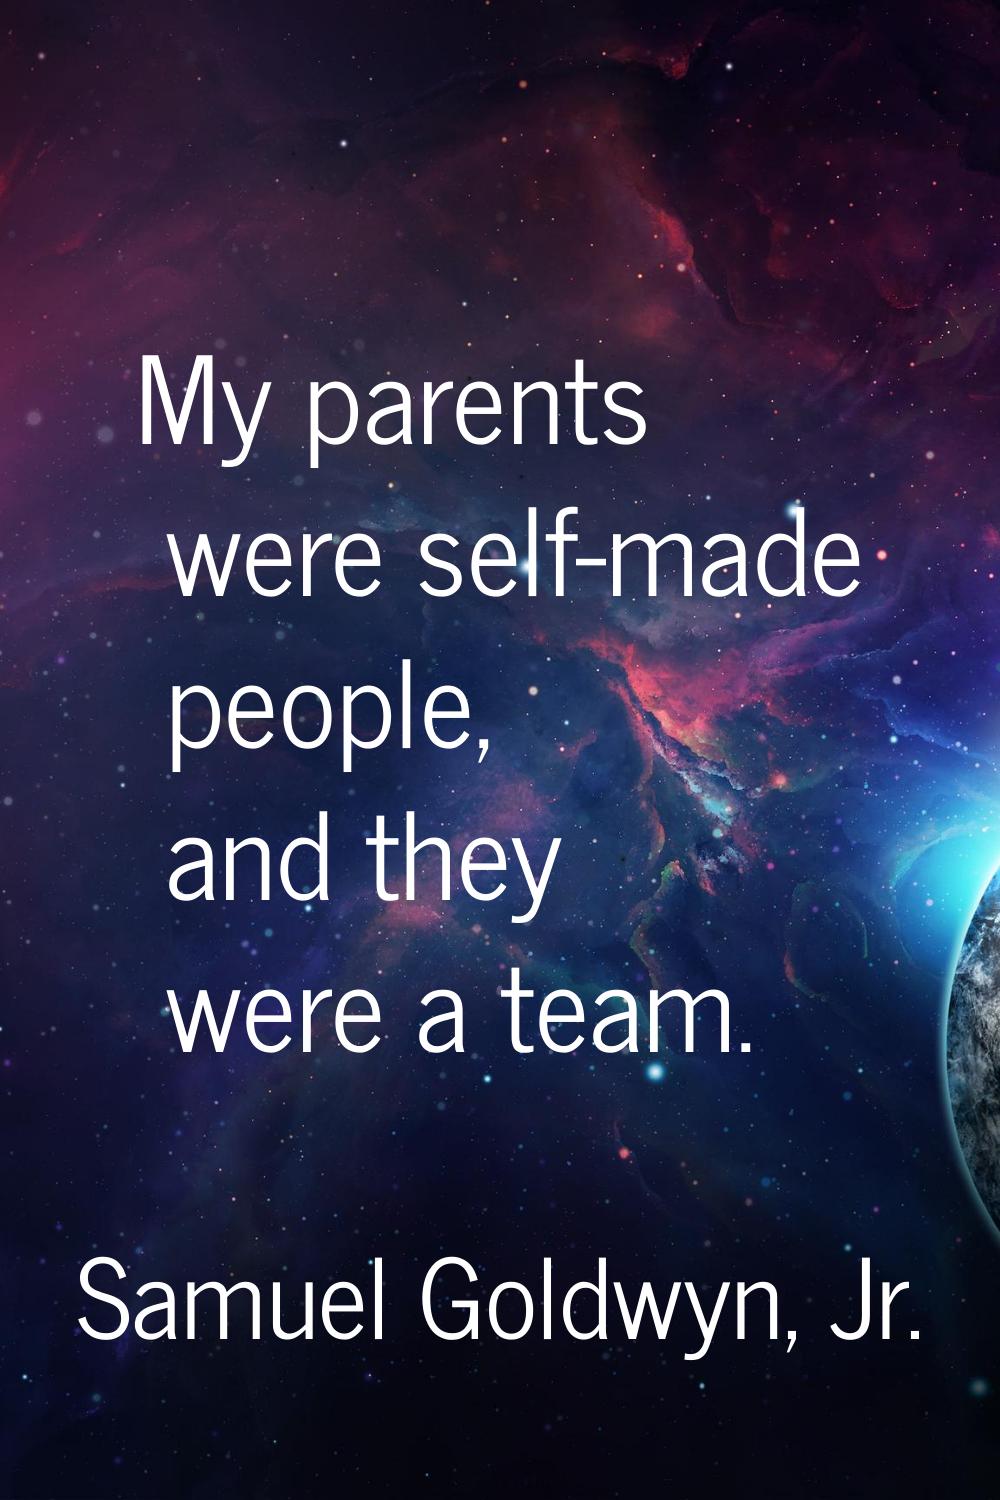 My parents were self-made people, and they were a team.